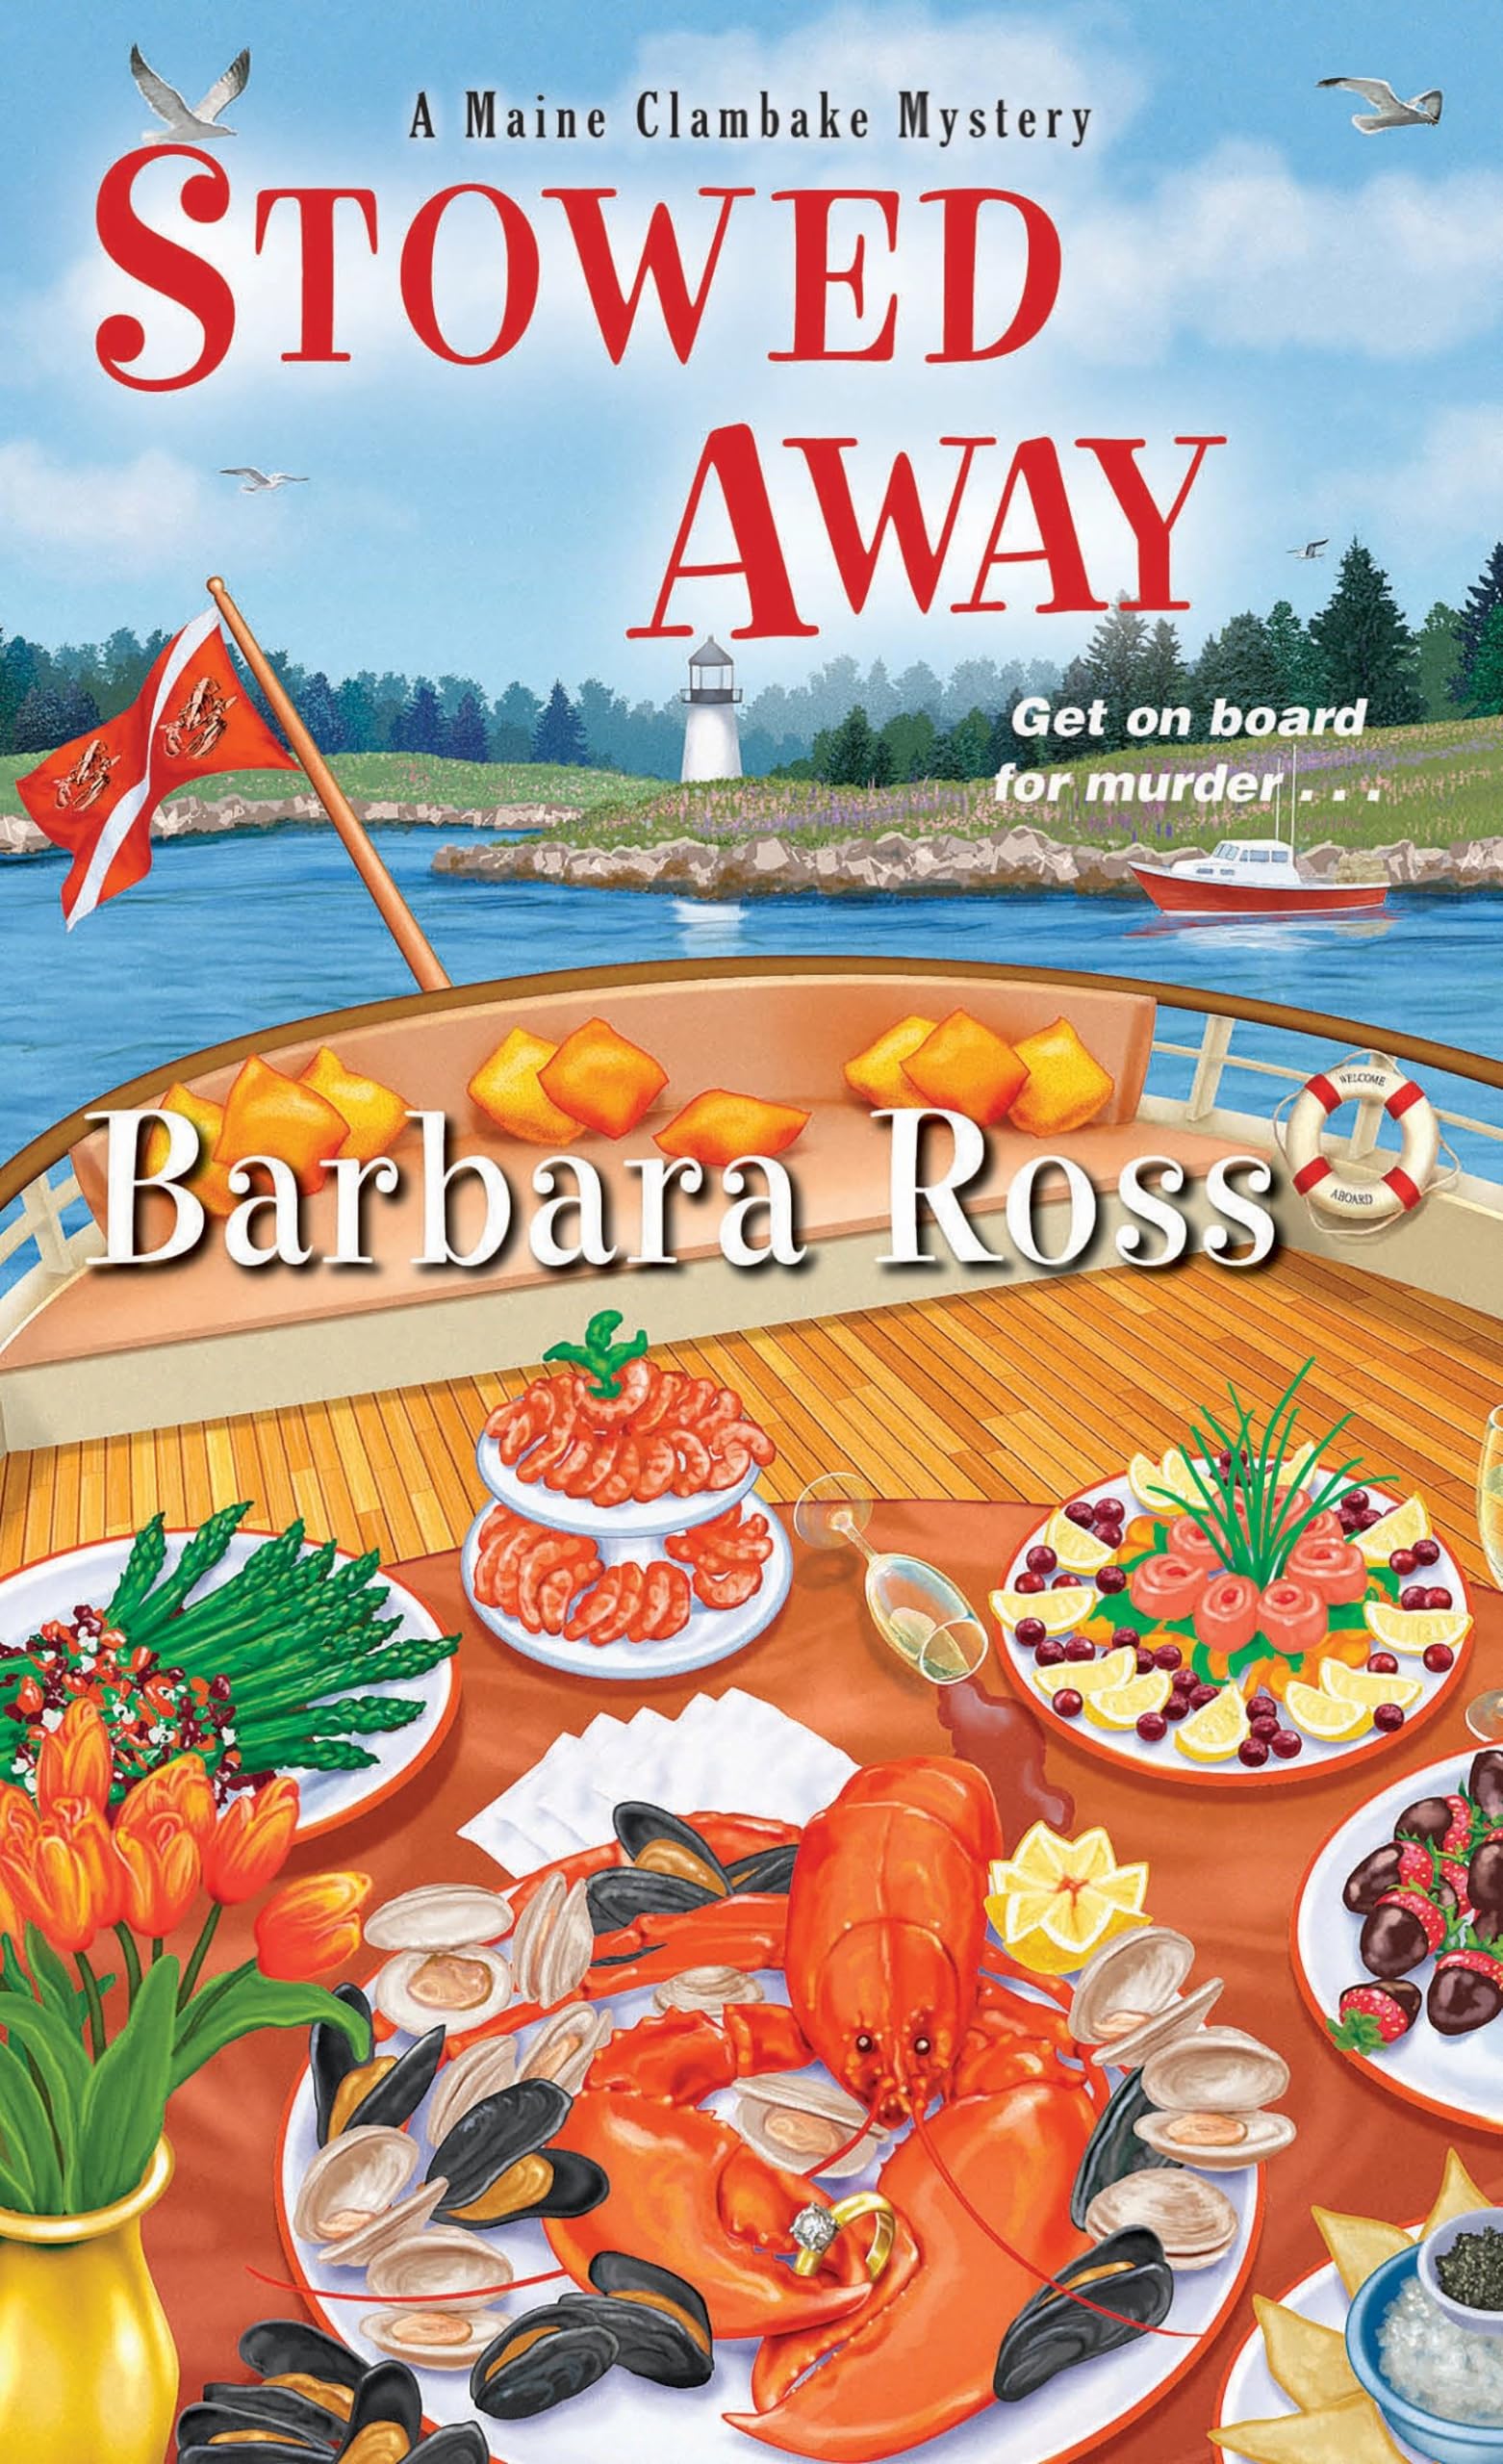 Stowed Away (A Maine Clambake Mystery)